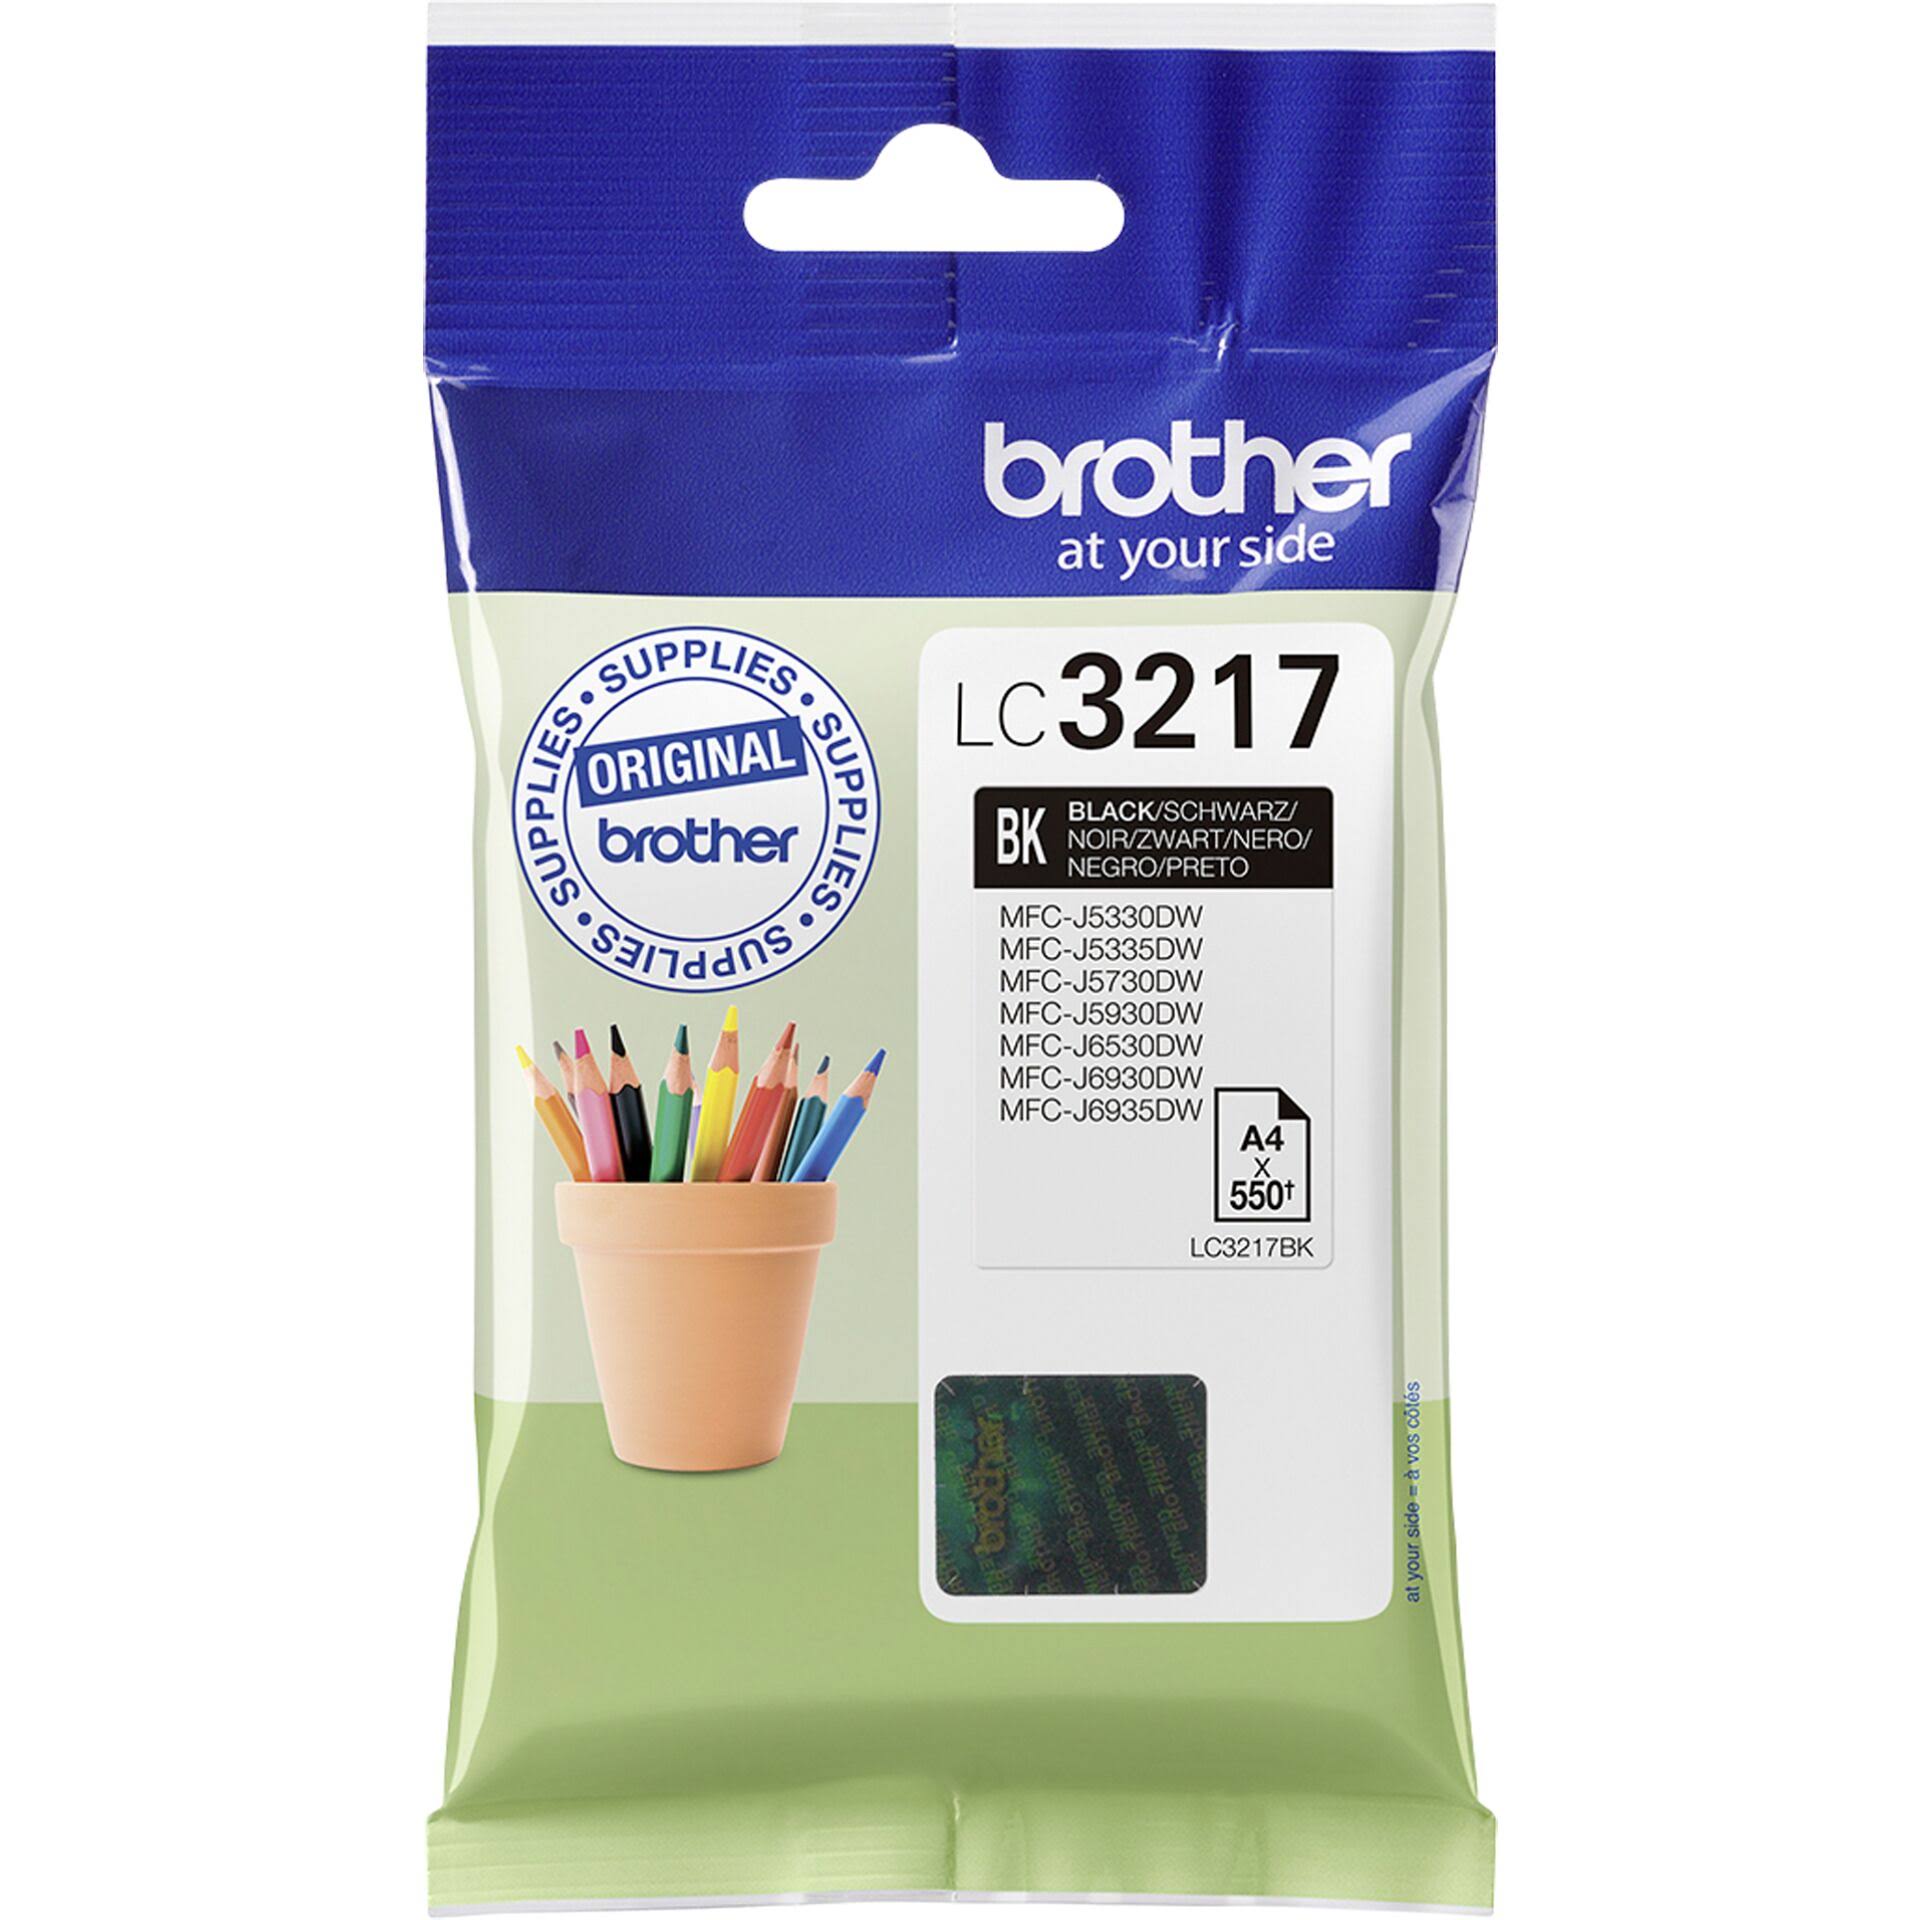 Brother LC 3217 Ink Cartridge - Black